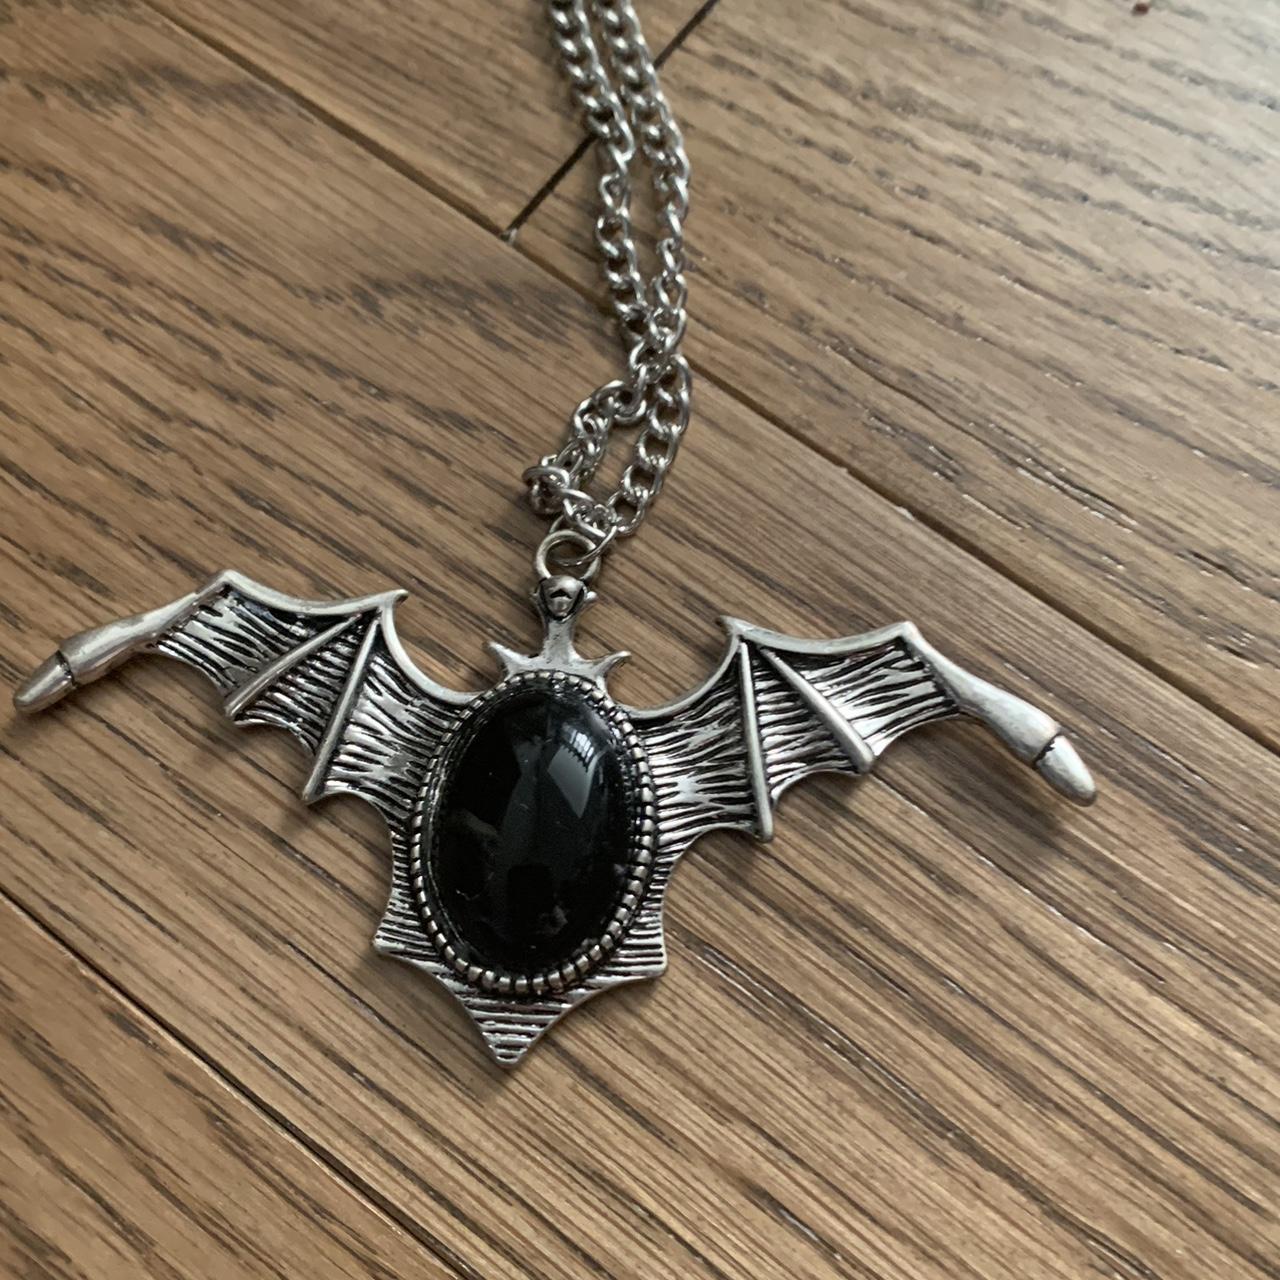 Skull Charm on Chain Emo/Goth Necklace